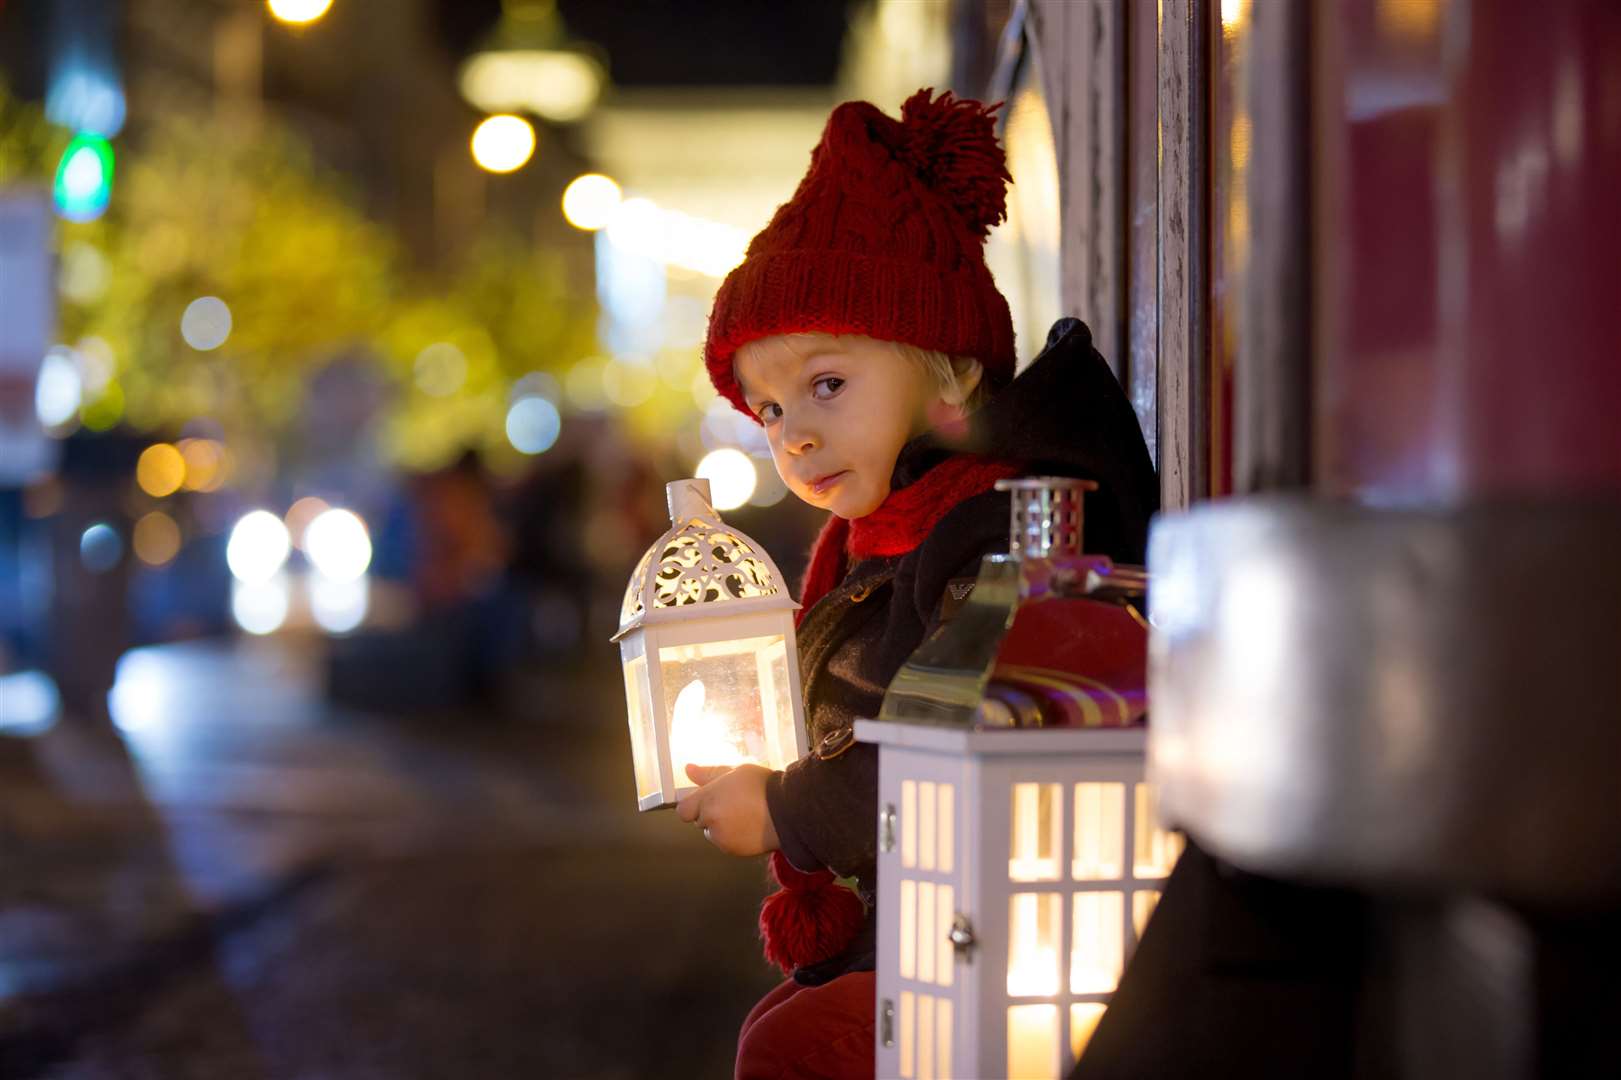 There will be a lantern parade with paper lanterns Picture: iStock